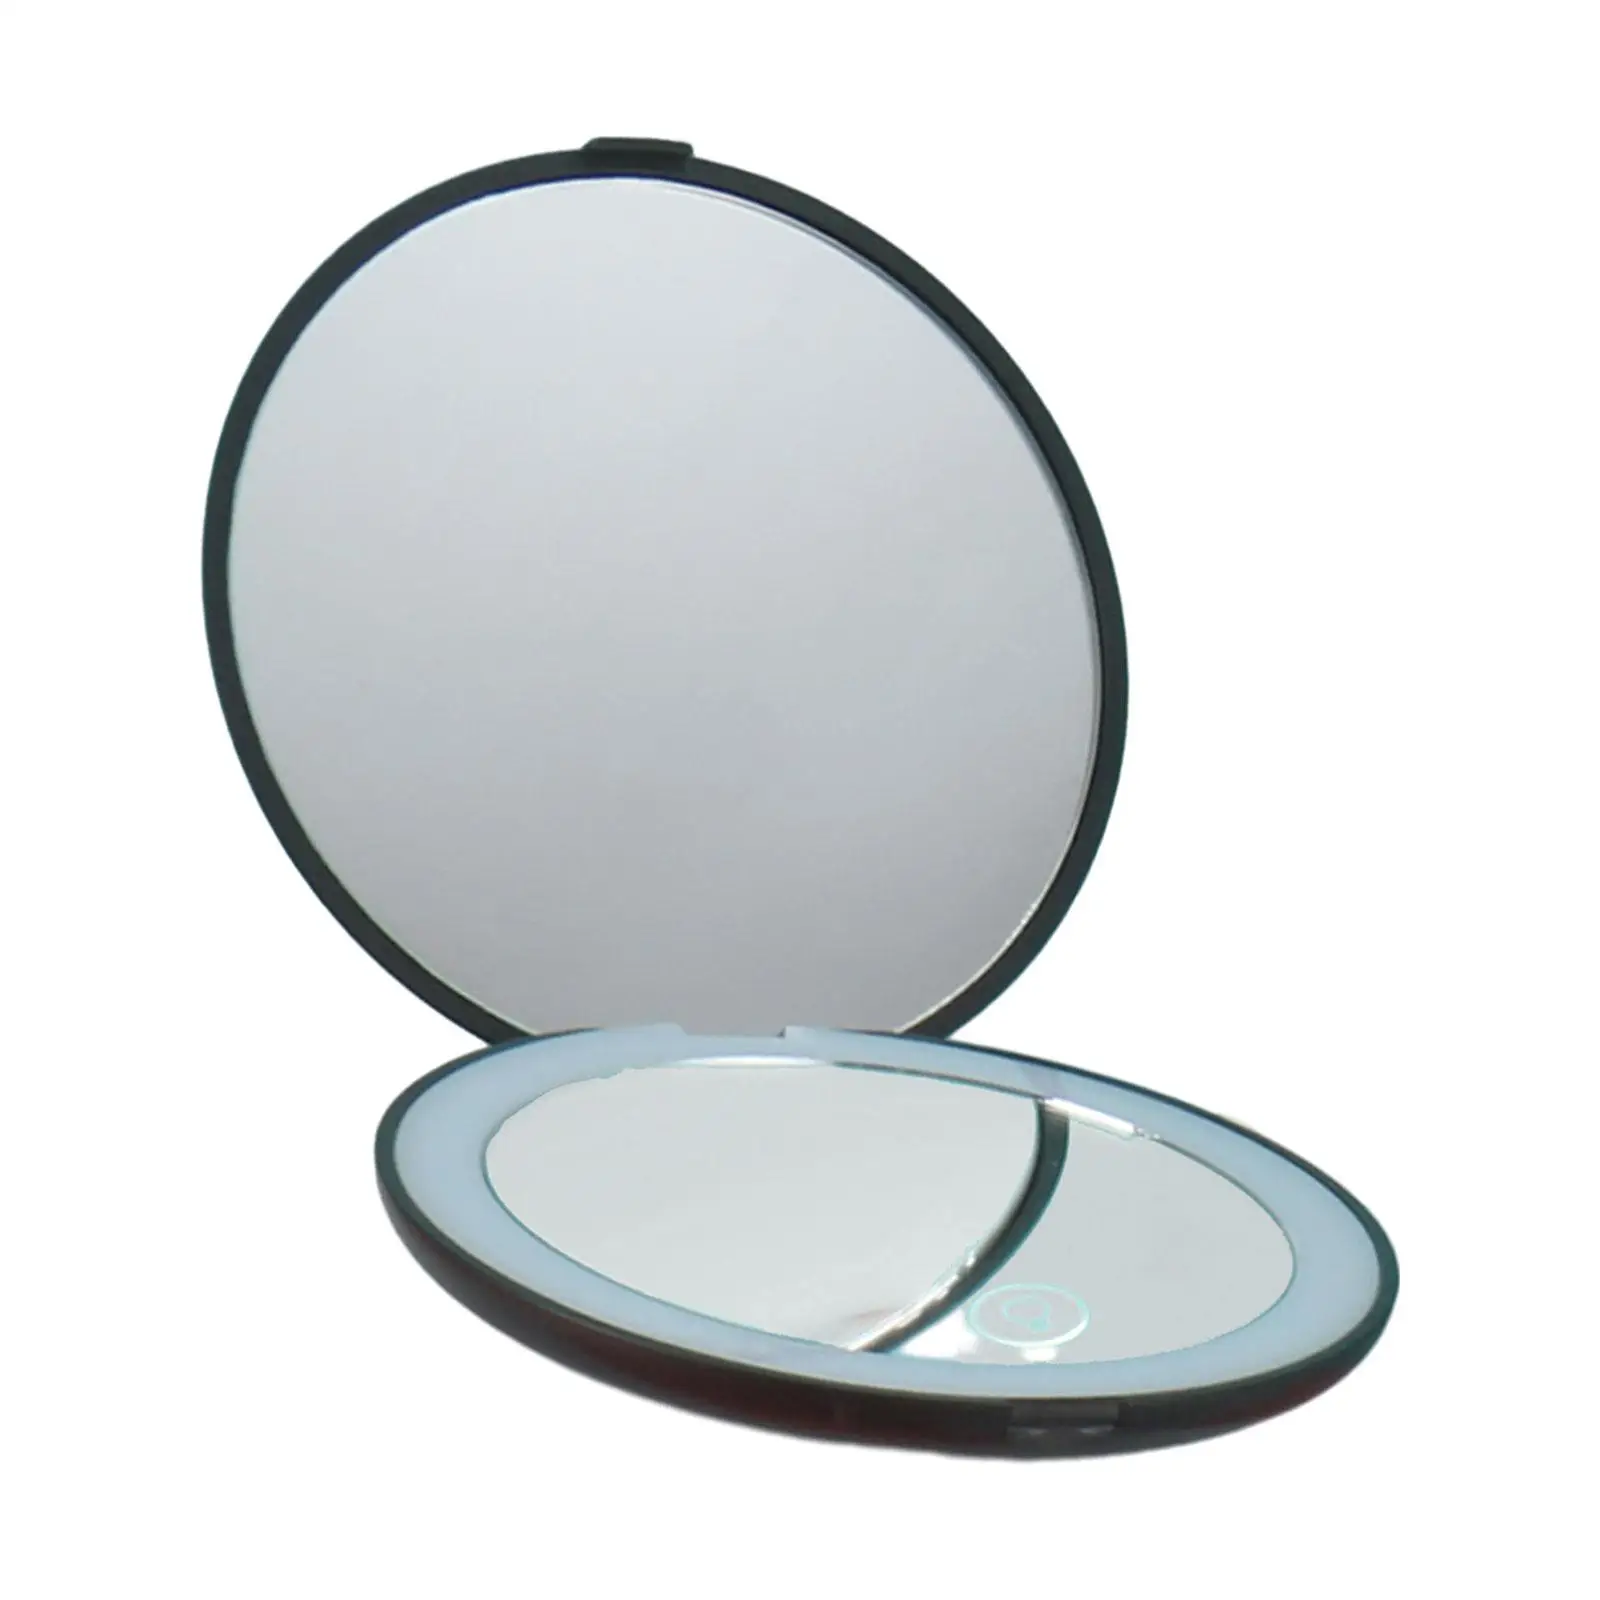 LED Compact Mirror Dimmable Round Rechargeable 2x Magnifying Handheld Makeup Mirror for Purse Travel Pocket Handbag Women Girls